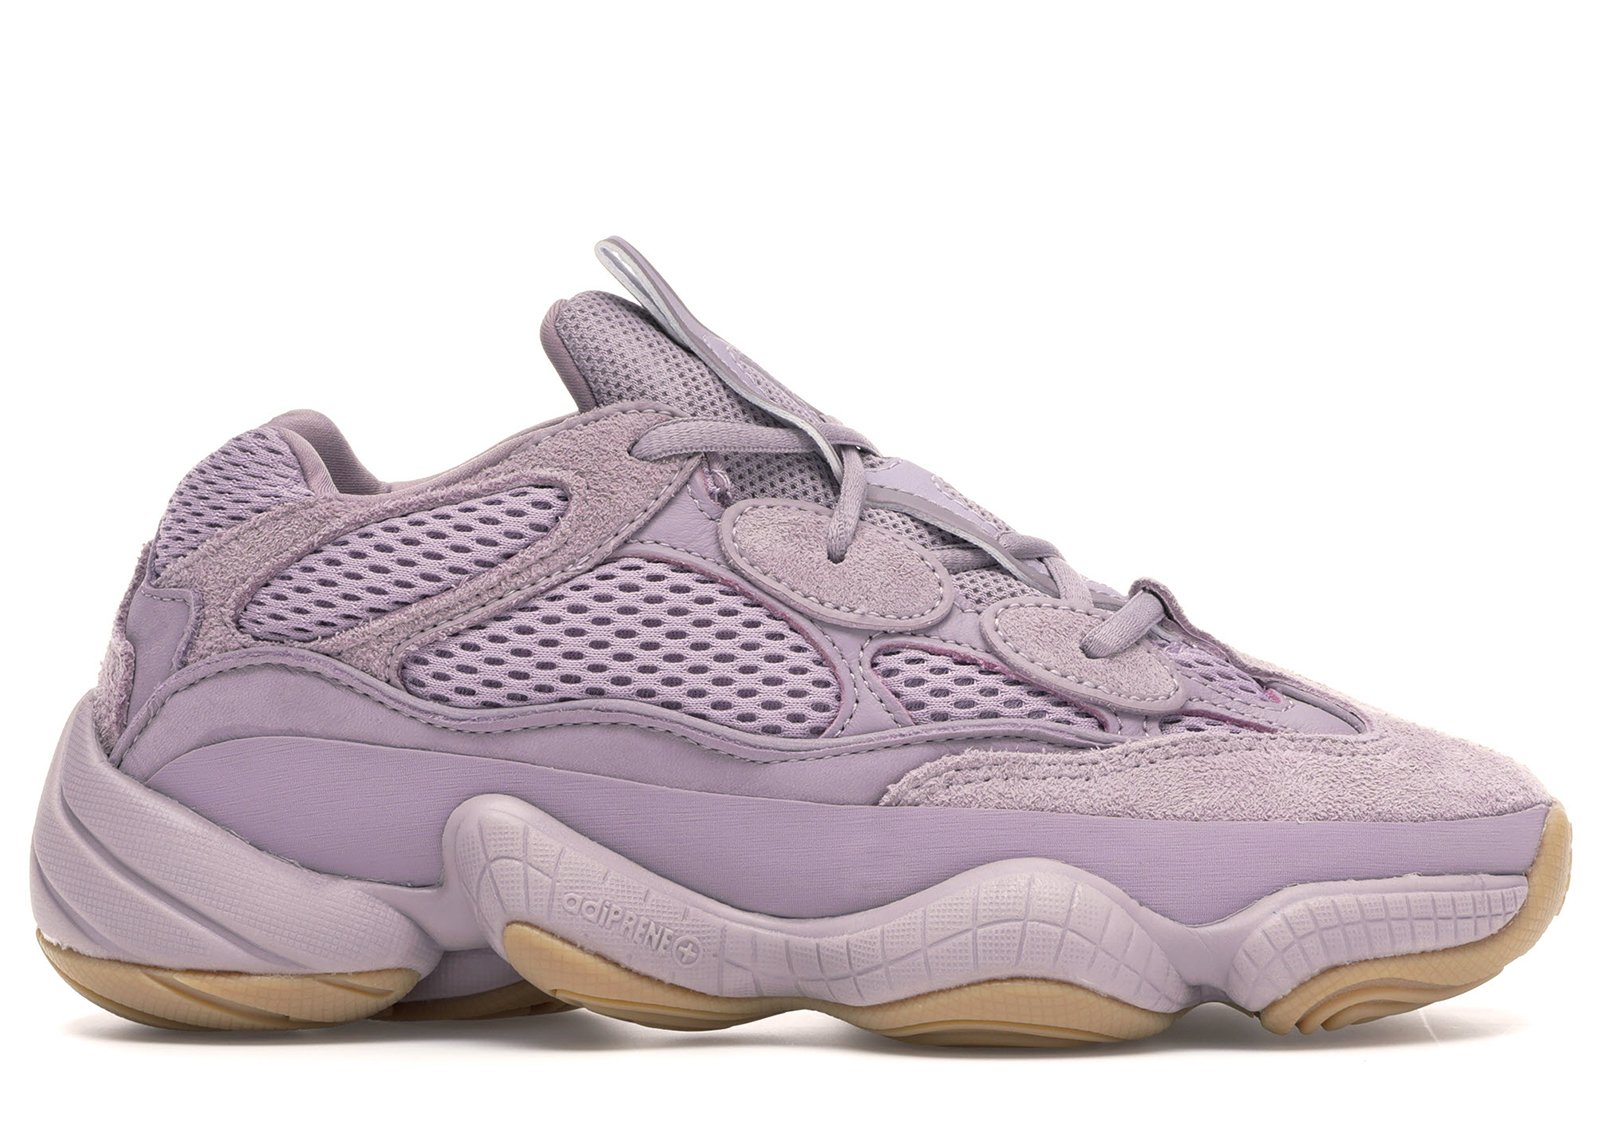 adidas Yeezy 500 Soft Vision sneakers